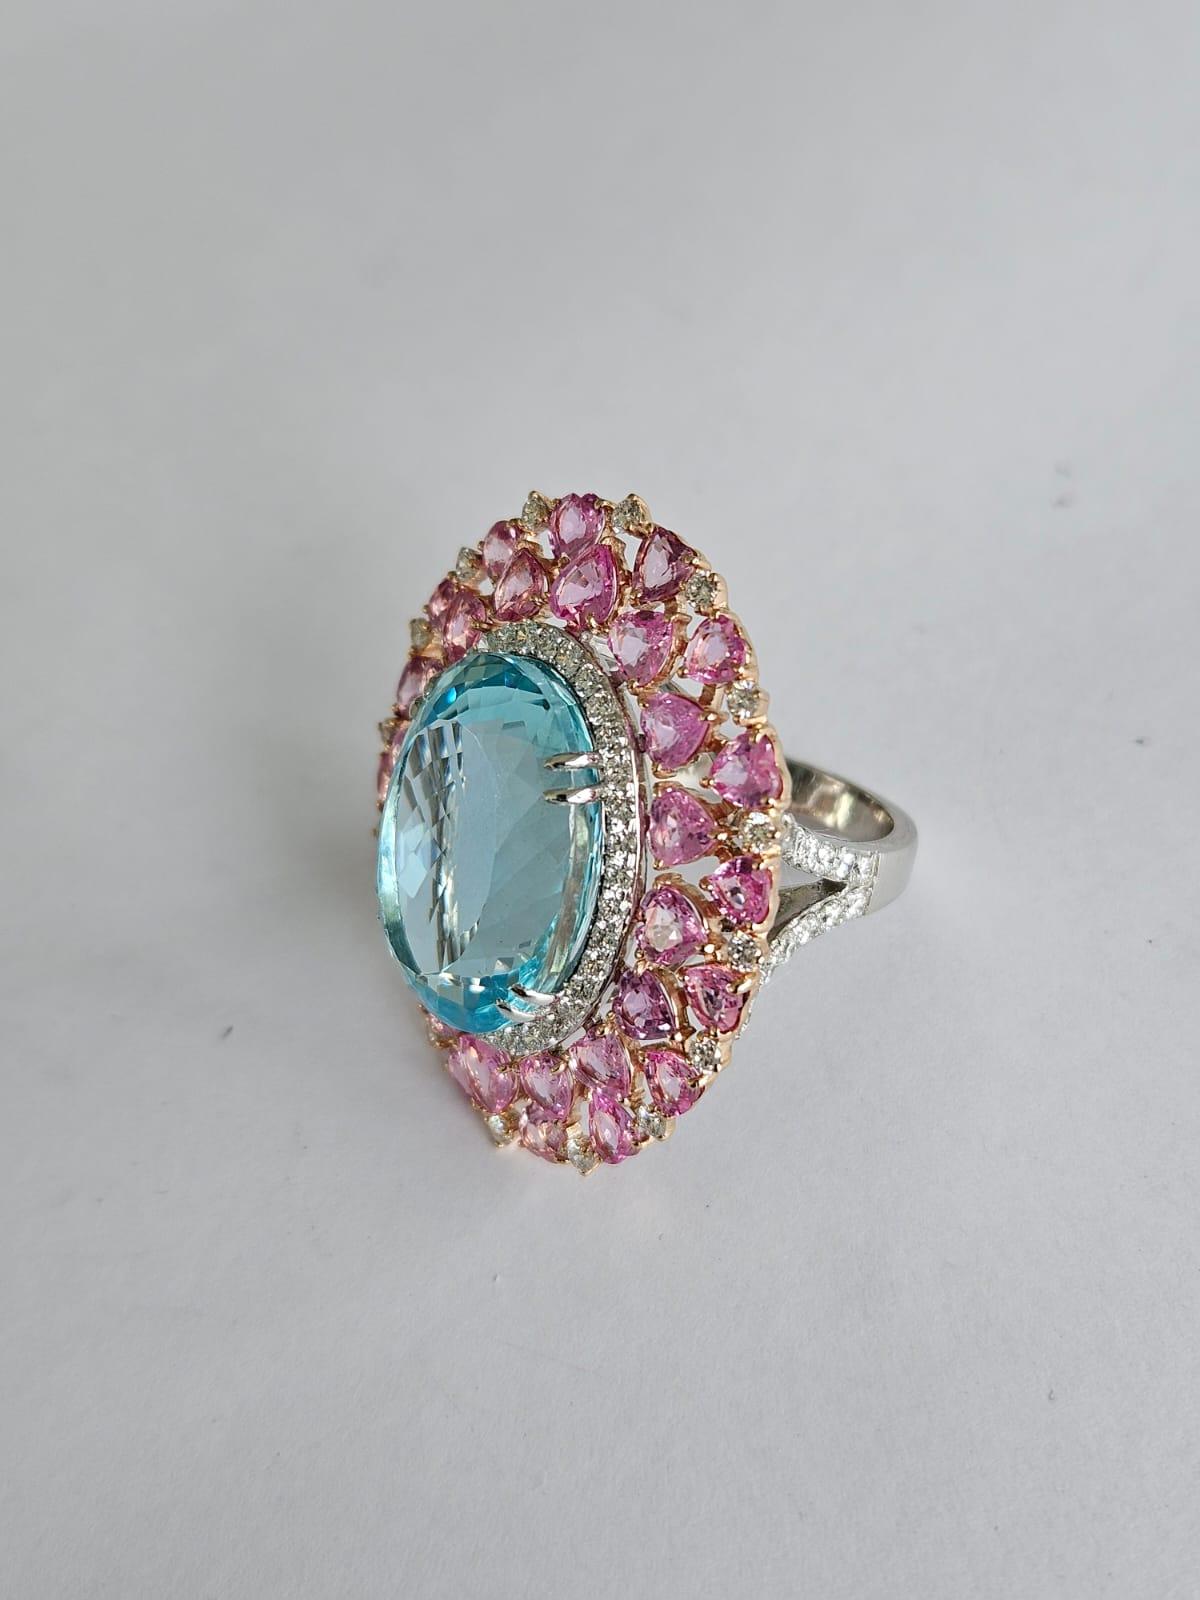 Heart Cut Set in 18K Gold, 19.58 carats, Aquamarine, Pink Sapphire & Diamond Cocktail Ring For Sale